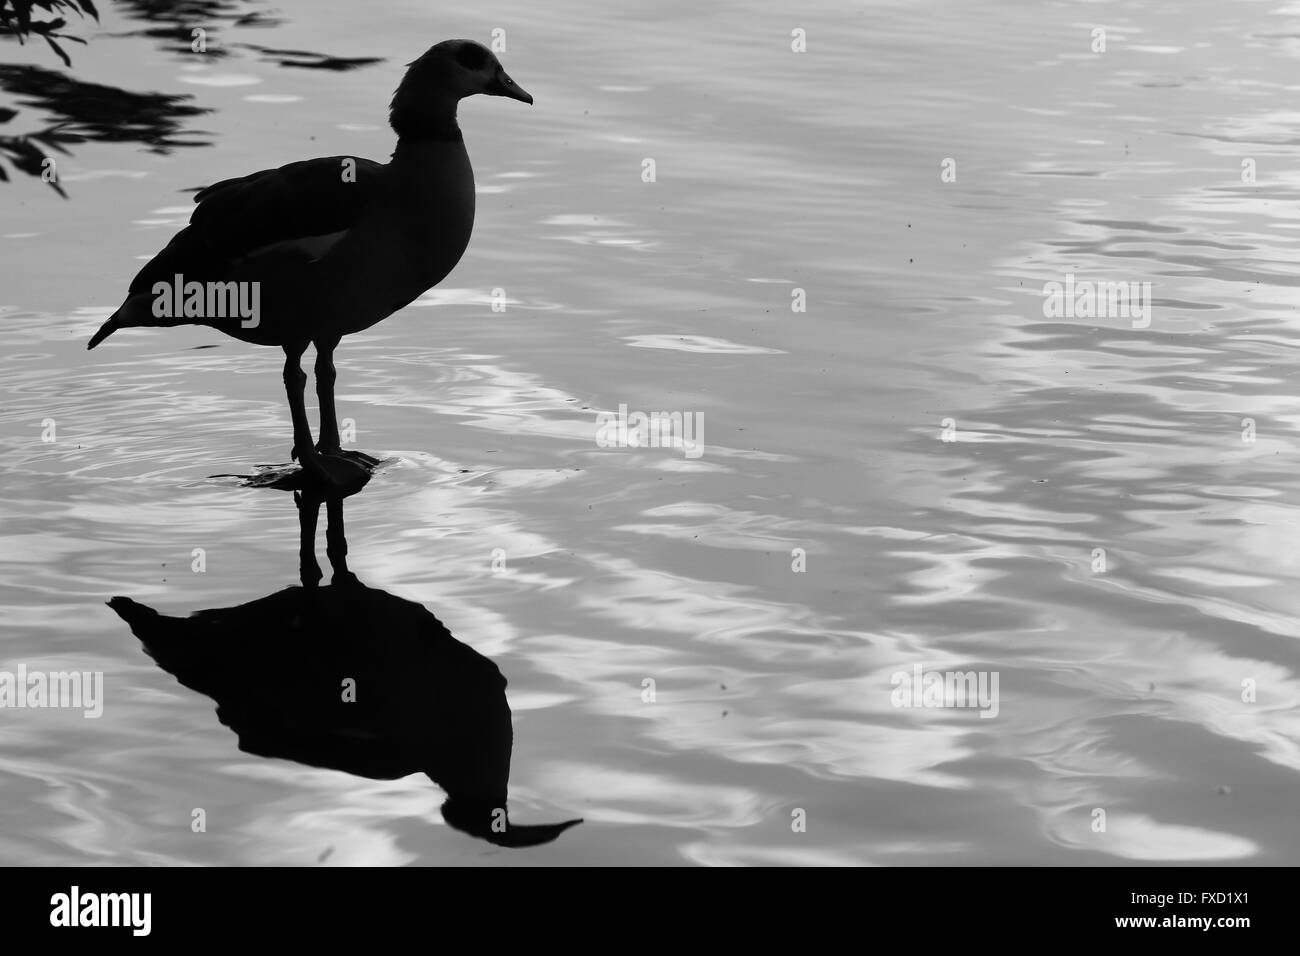 Goose Black and White Stock Photos & Images - Alamy